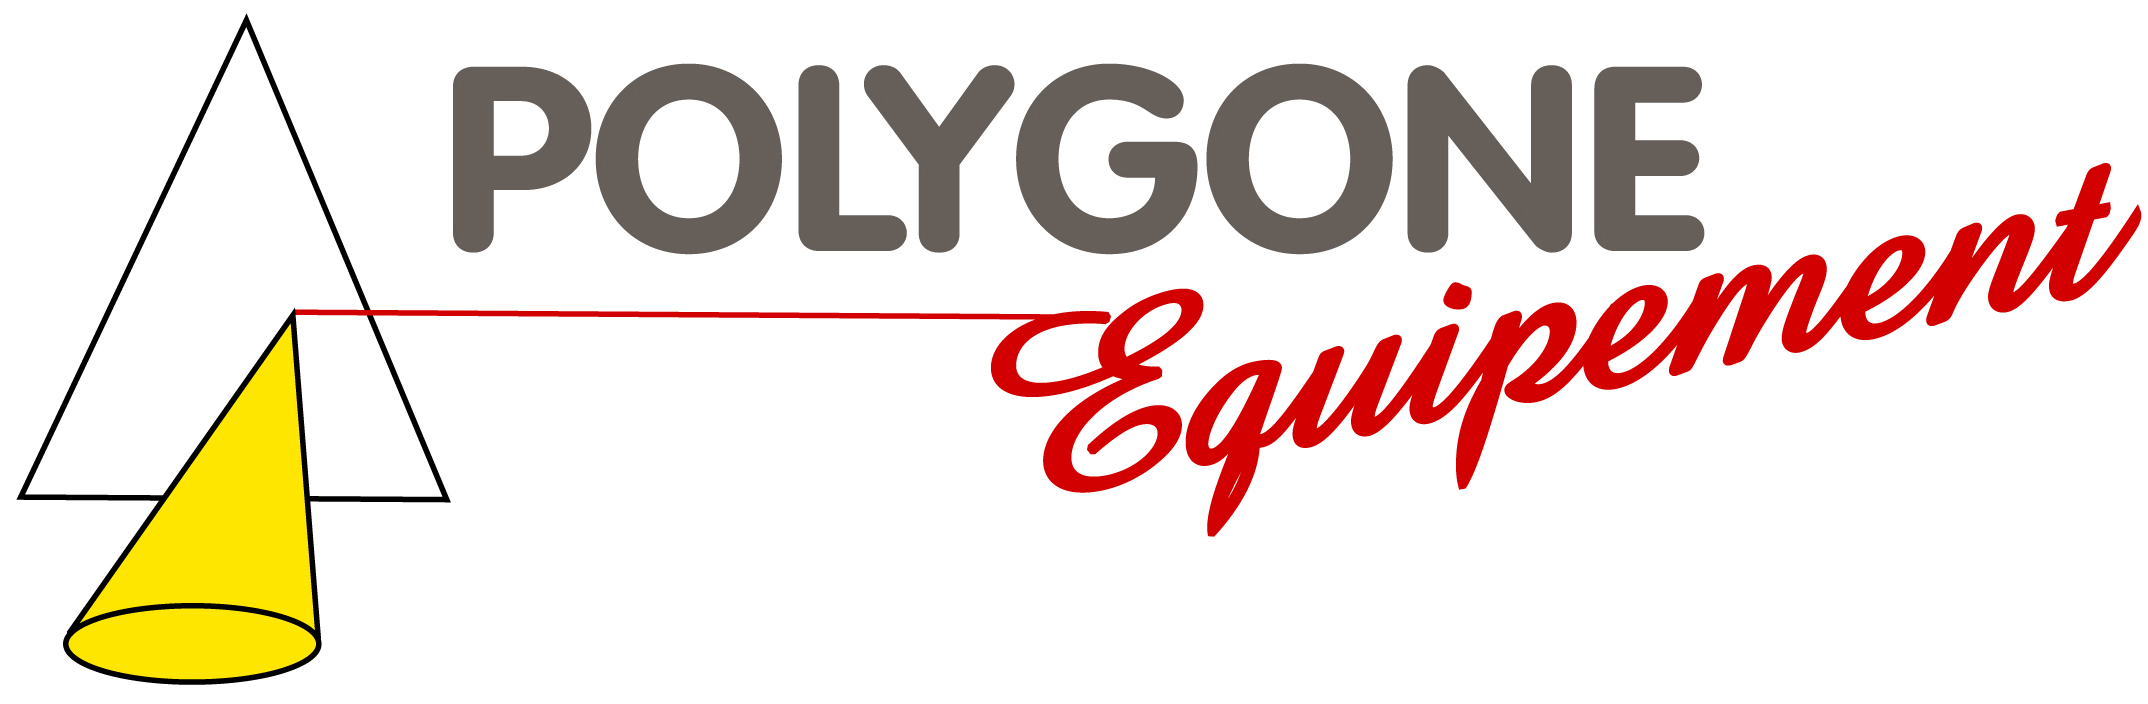 polygone-equipements